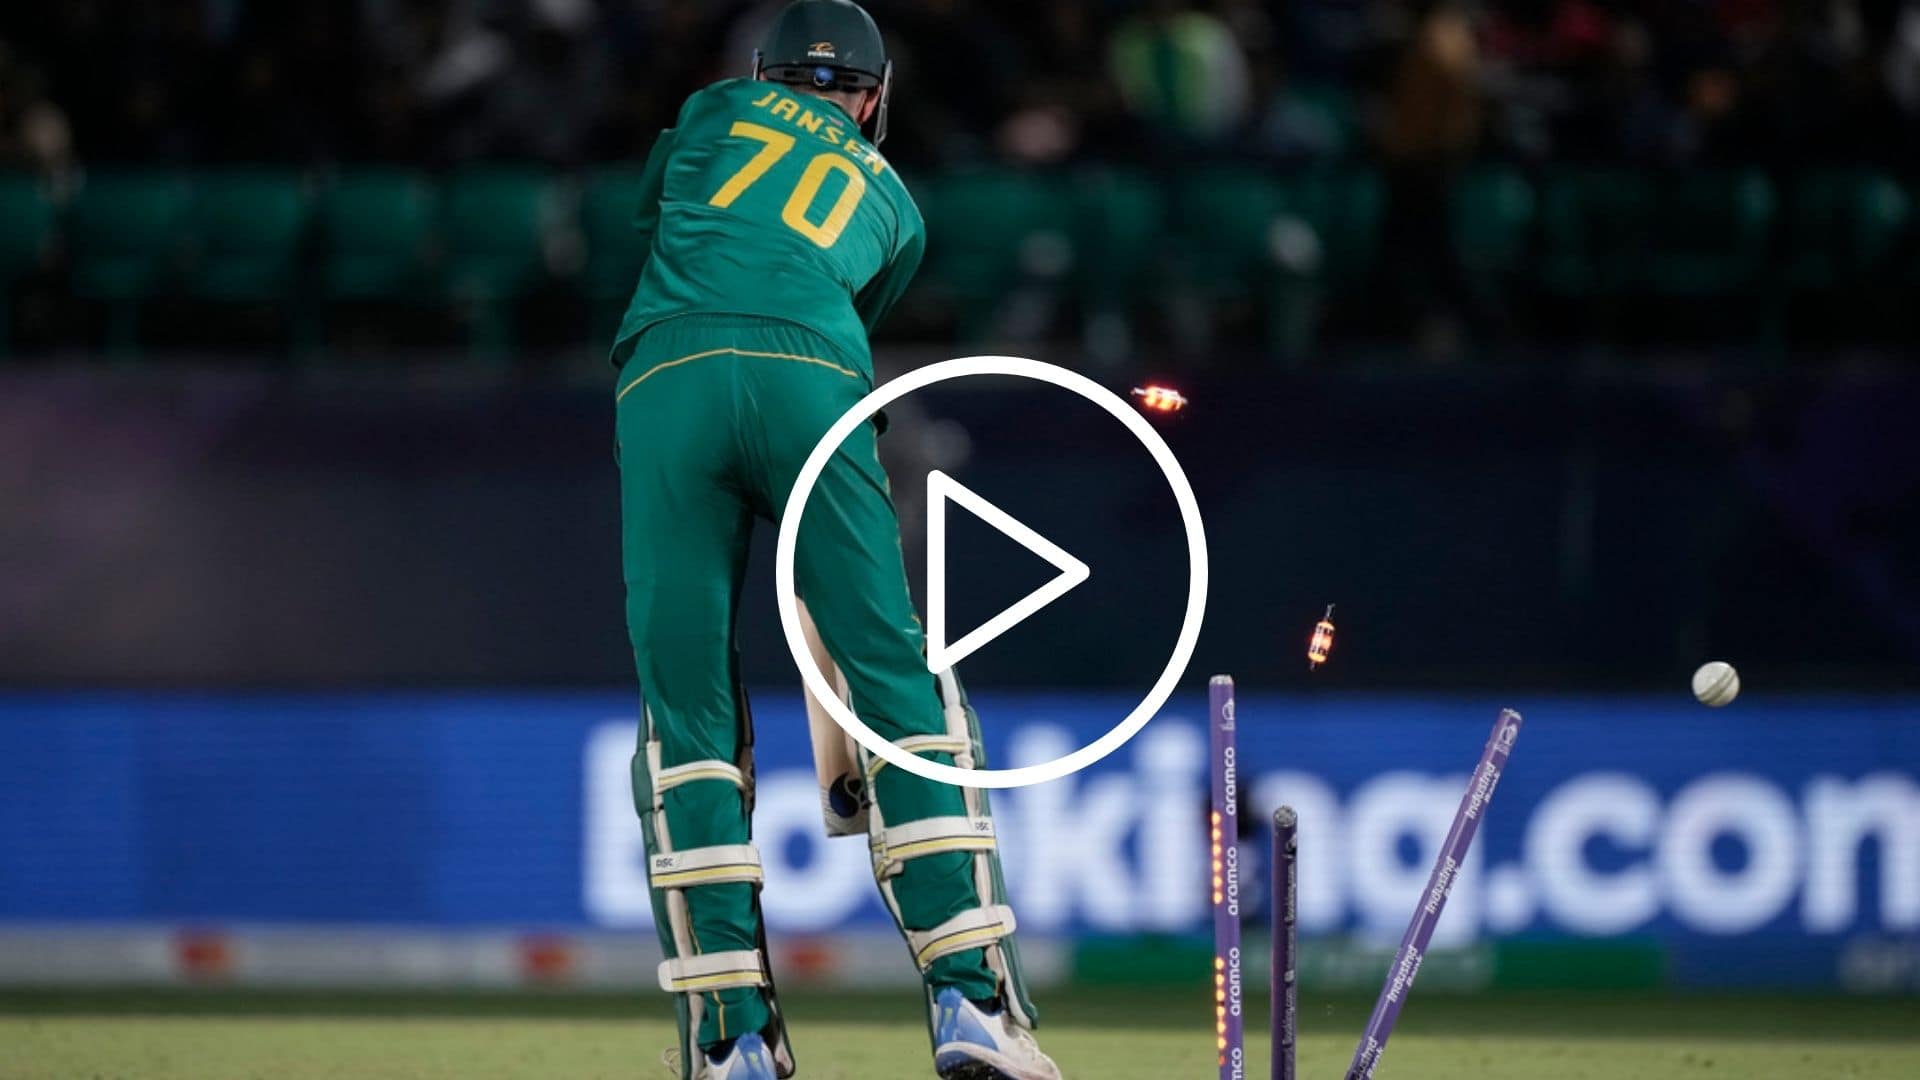 [Watch] Marco Jansen Cleaned Up By Meekeren As NED Smell World Cup 2023 Win Over SA